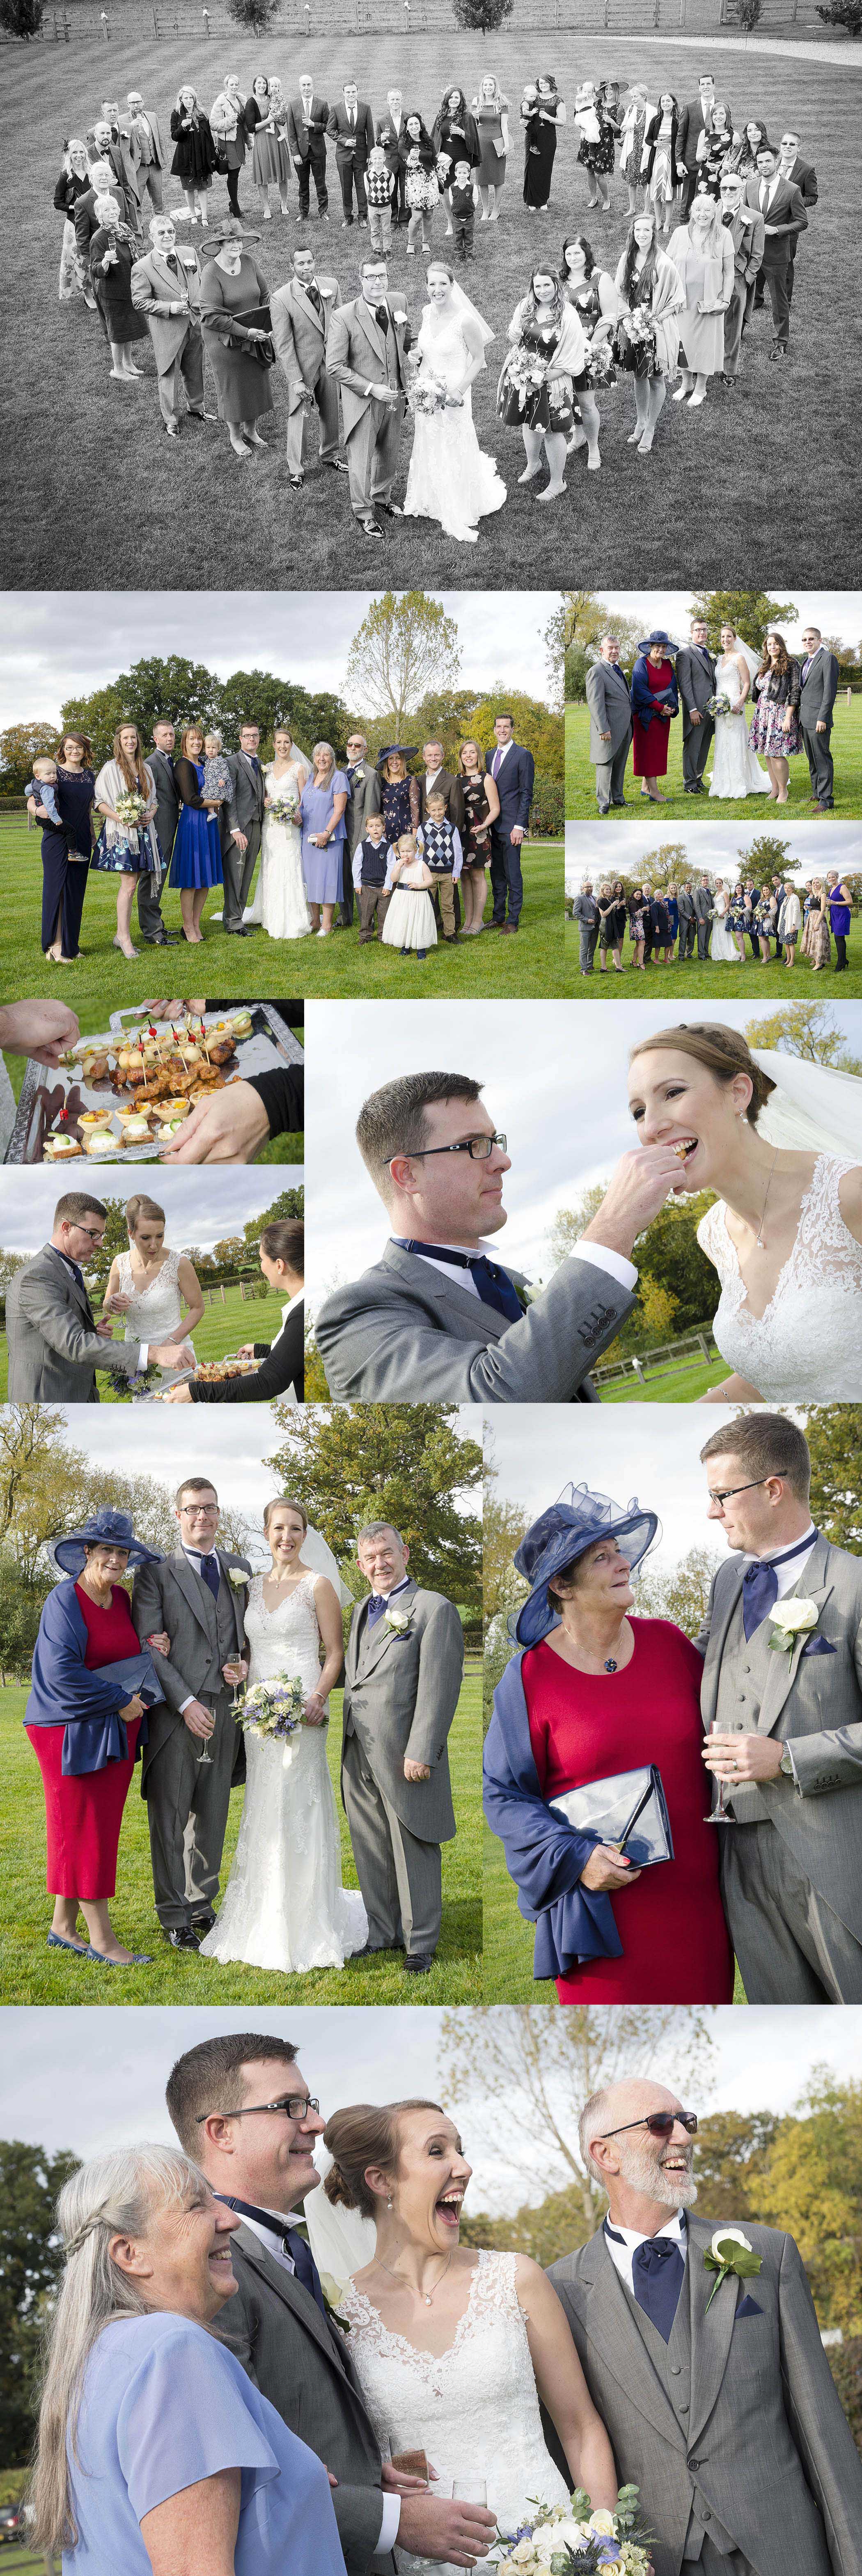 Professional photographer, Wedding Photography at Manor Hill House